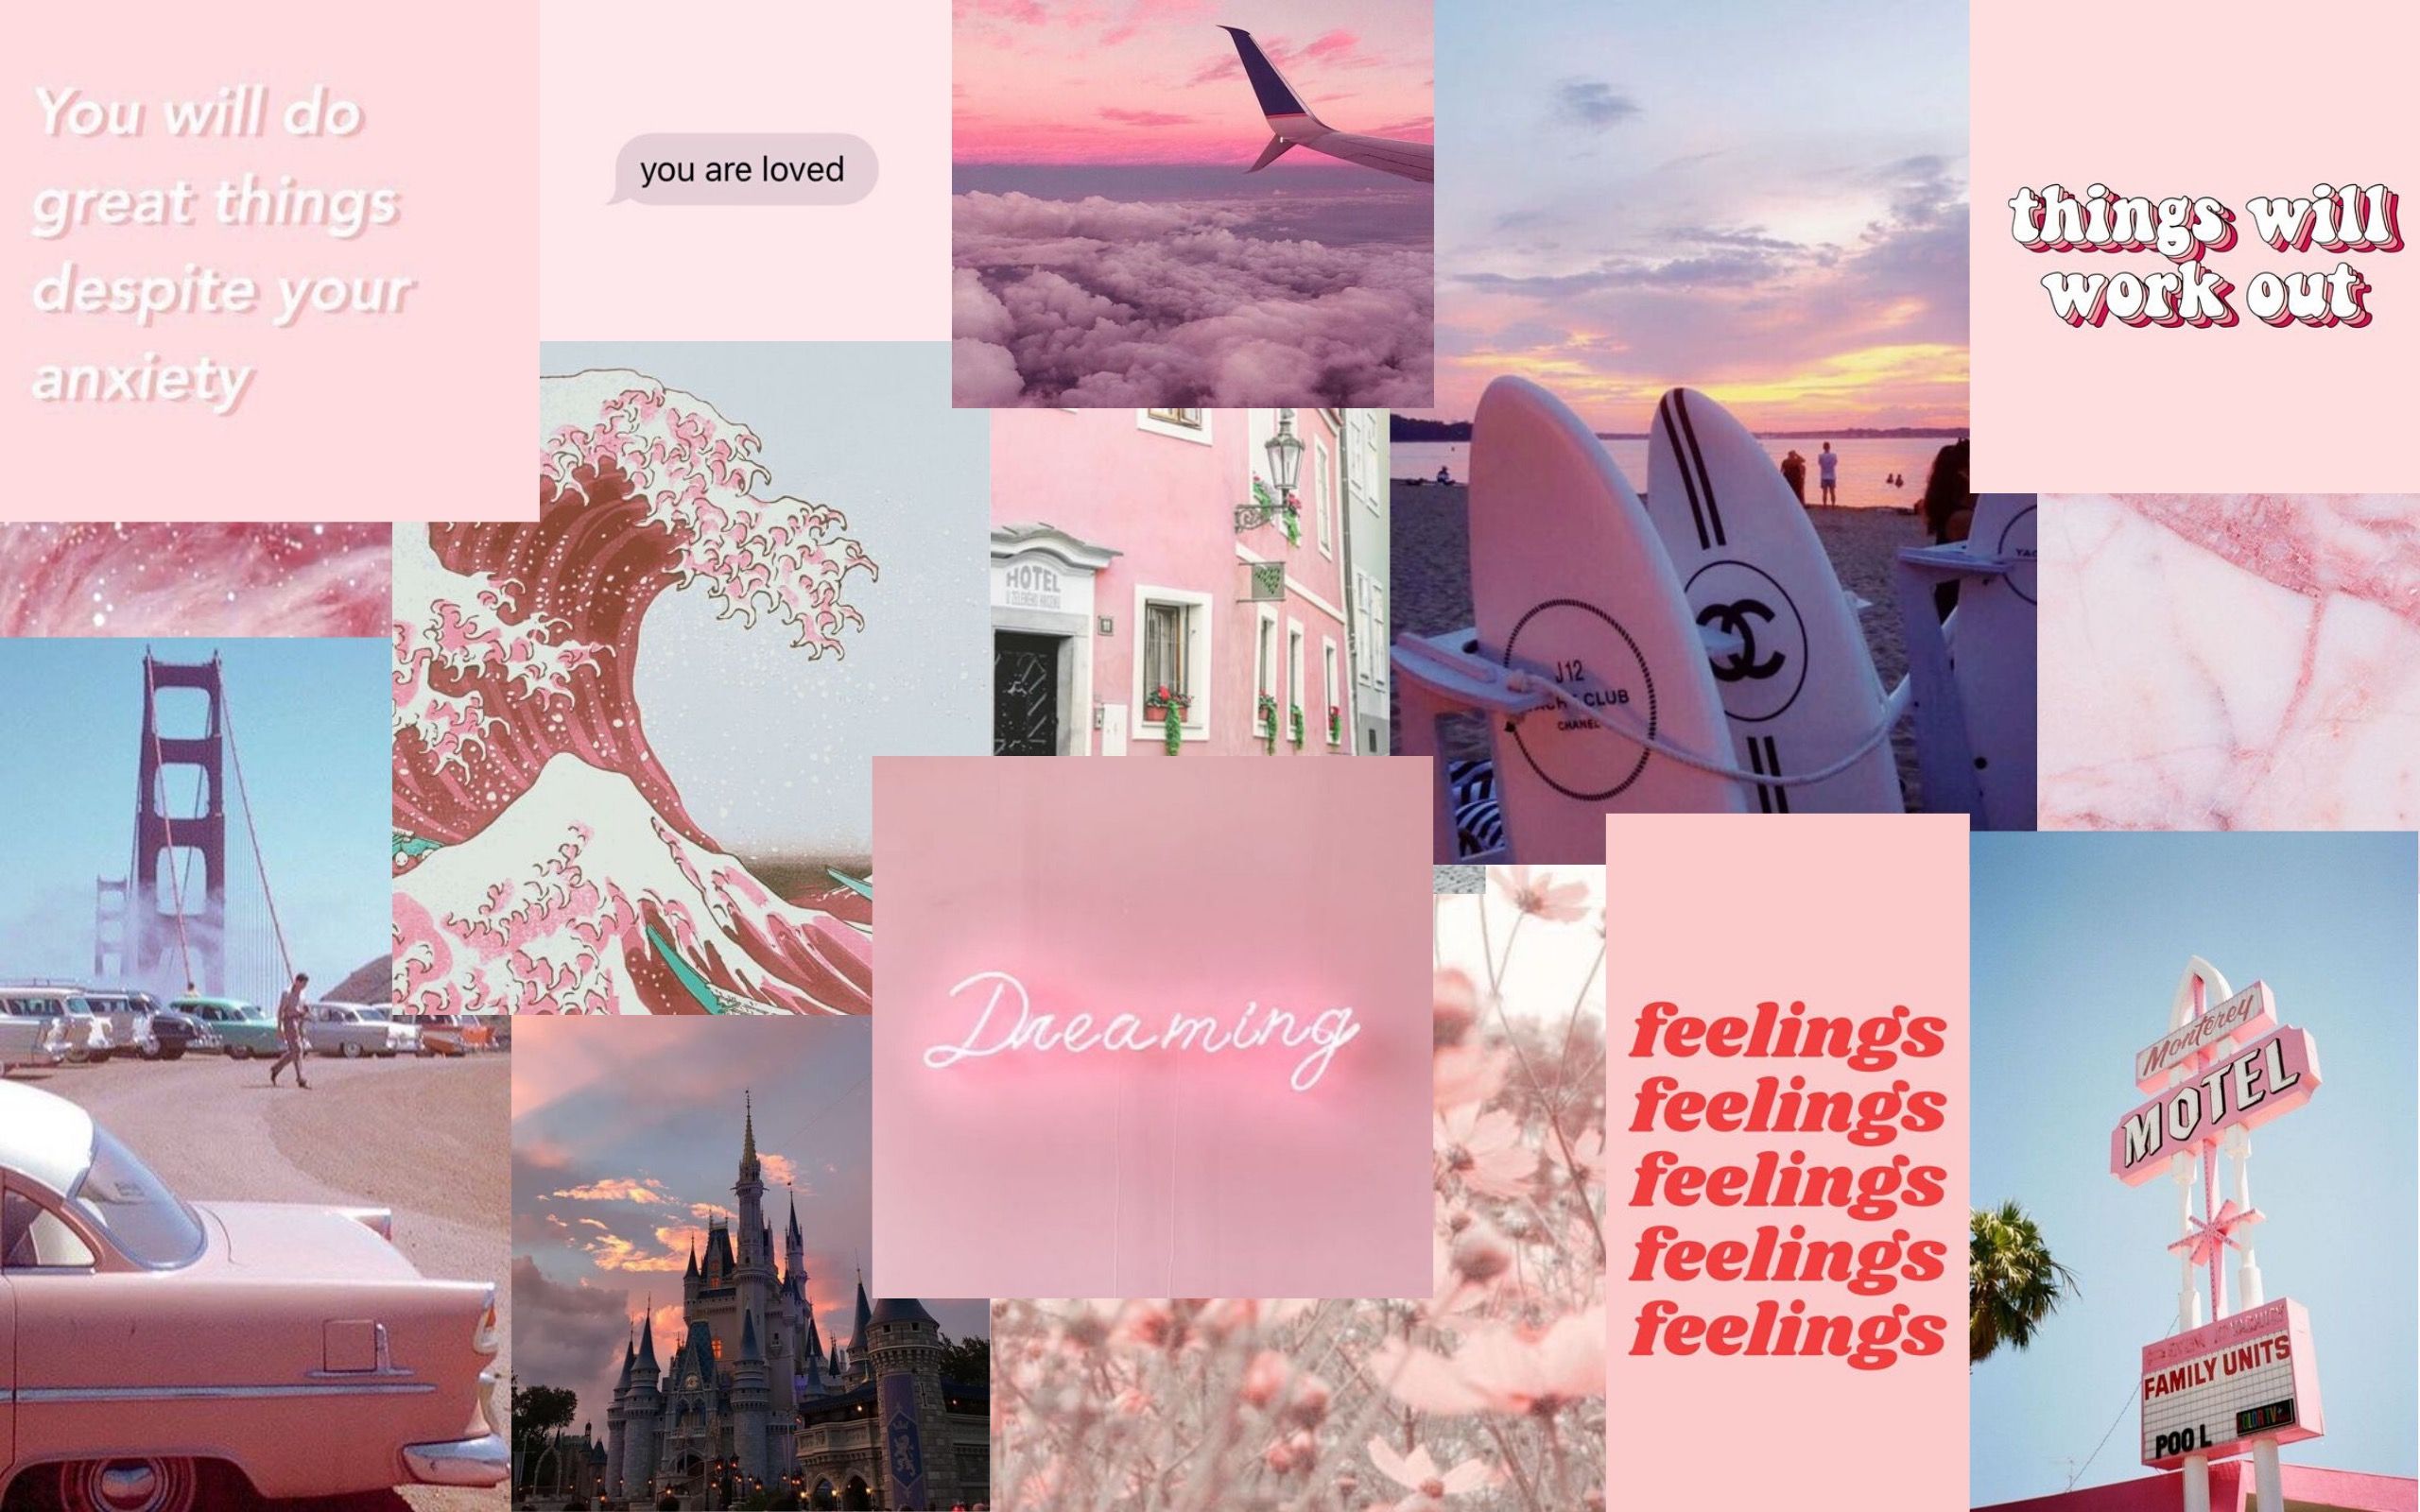 A collage of pink aesthetic images including clouds, a car, and motivational quotes. - Cute pink